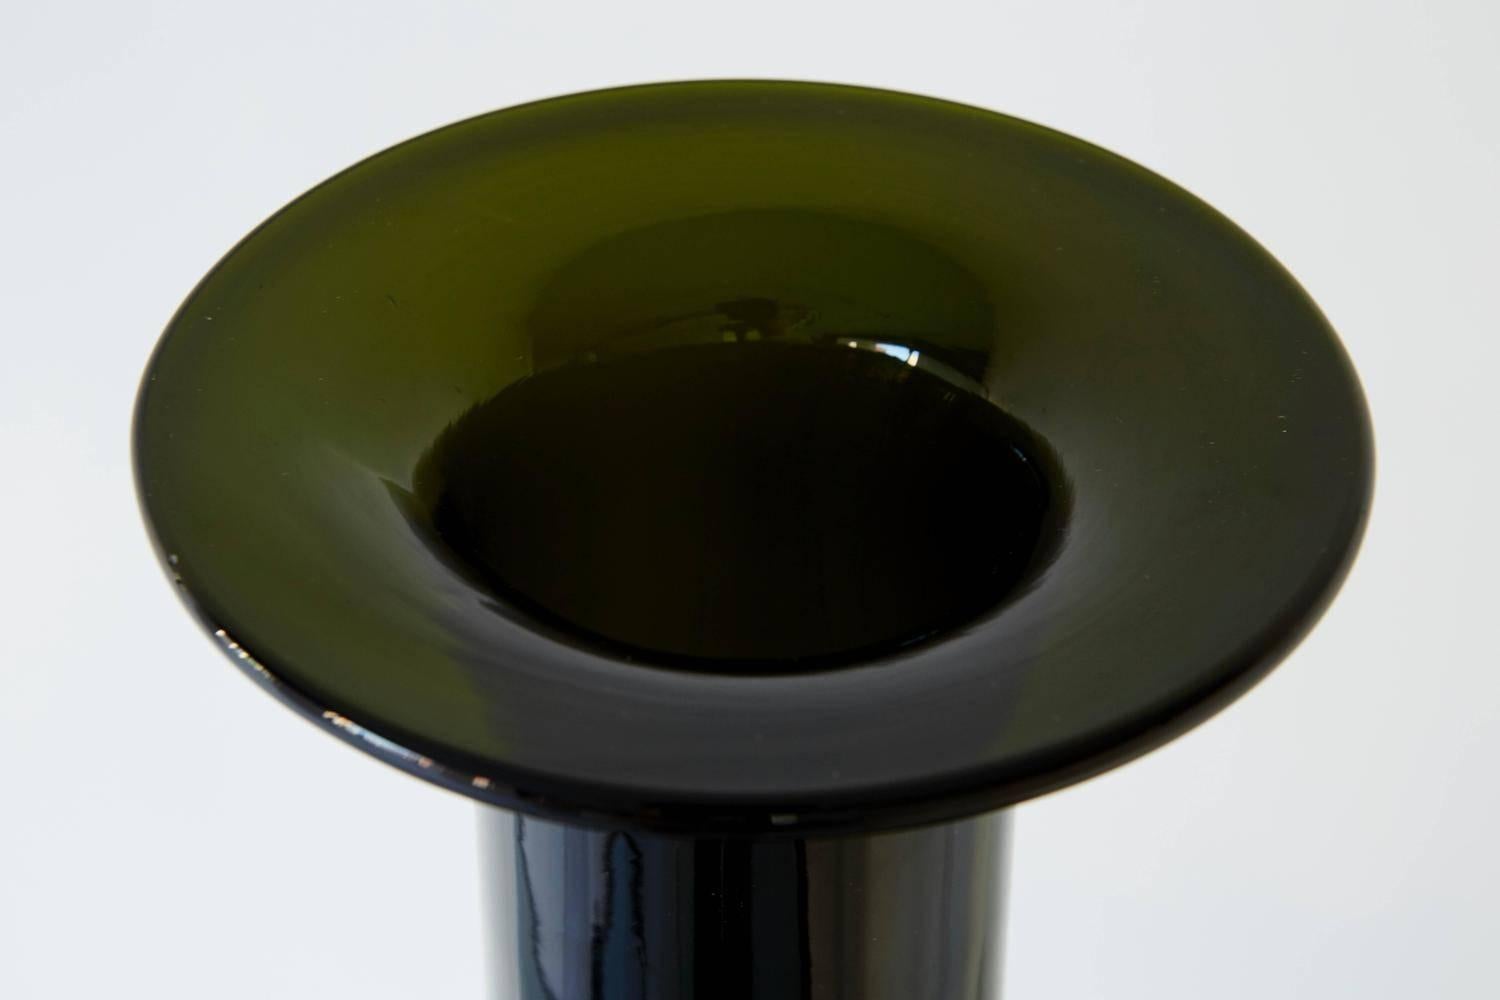 Pair of Scandinavian Modern large olive green vessels designed by Otto Brauer for Holmegaard.